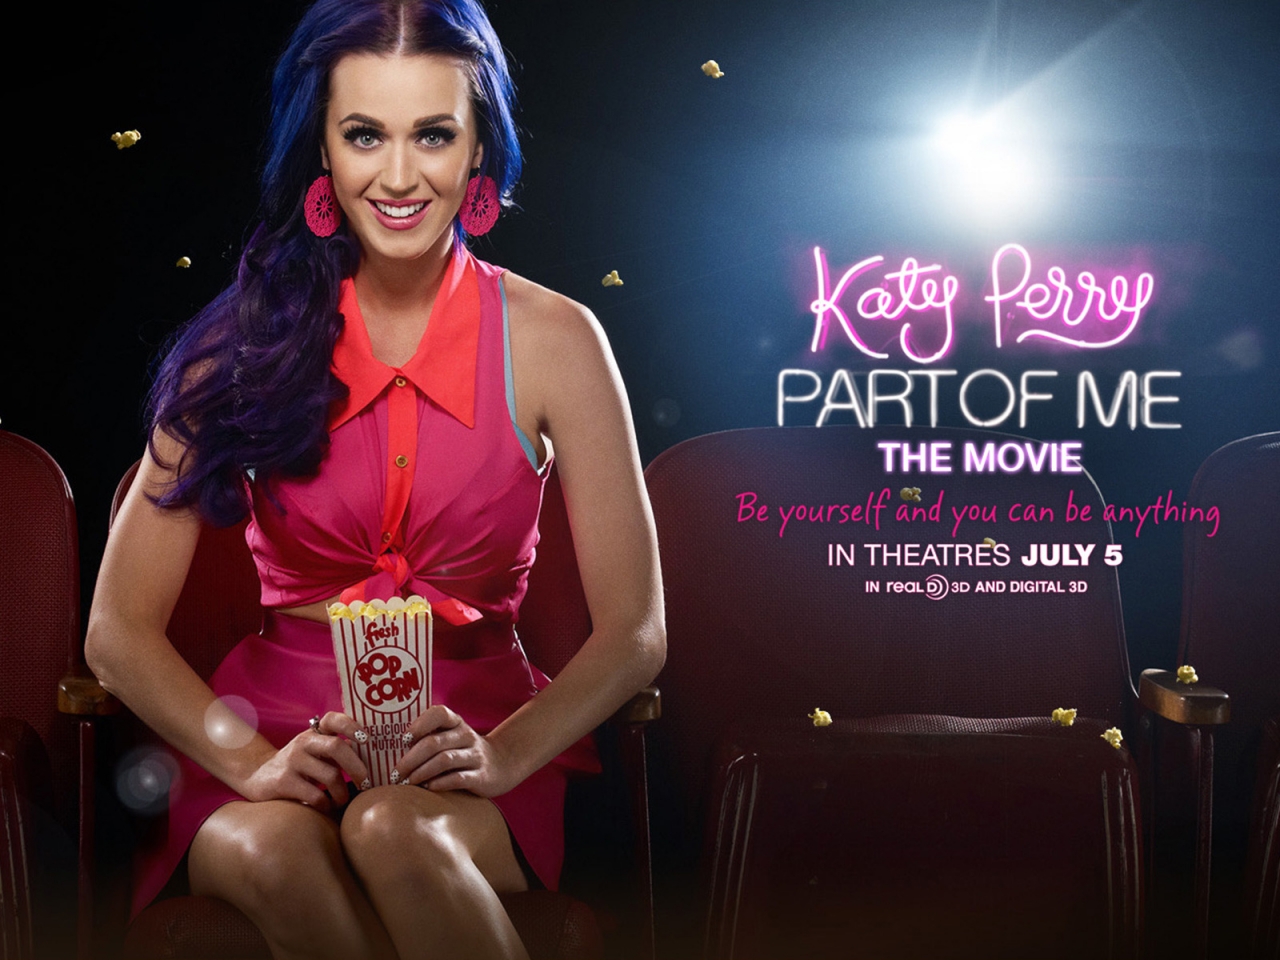 Katy Perry Part Of Me Movie 2012 for 1280 x 960 resolution